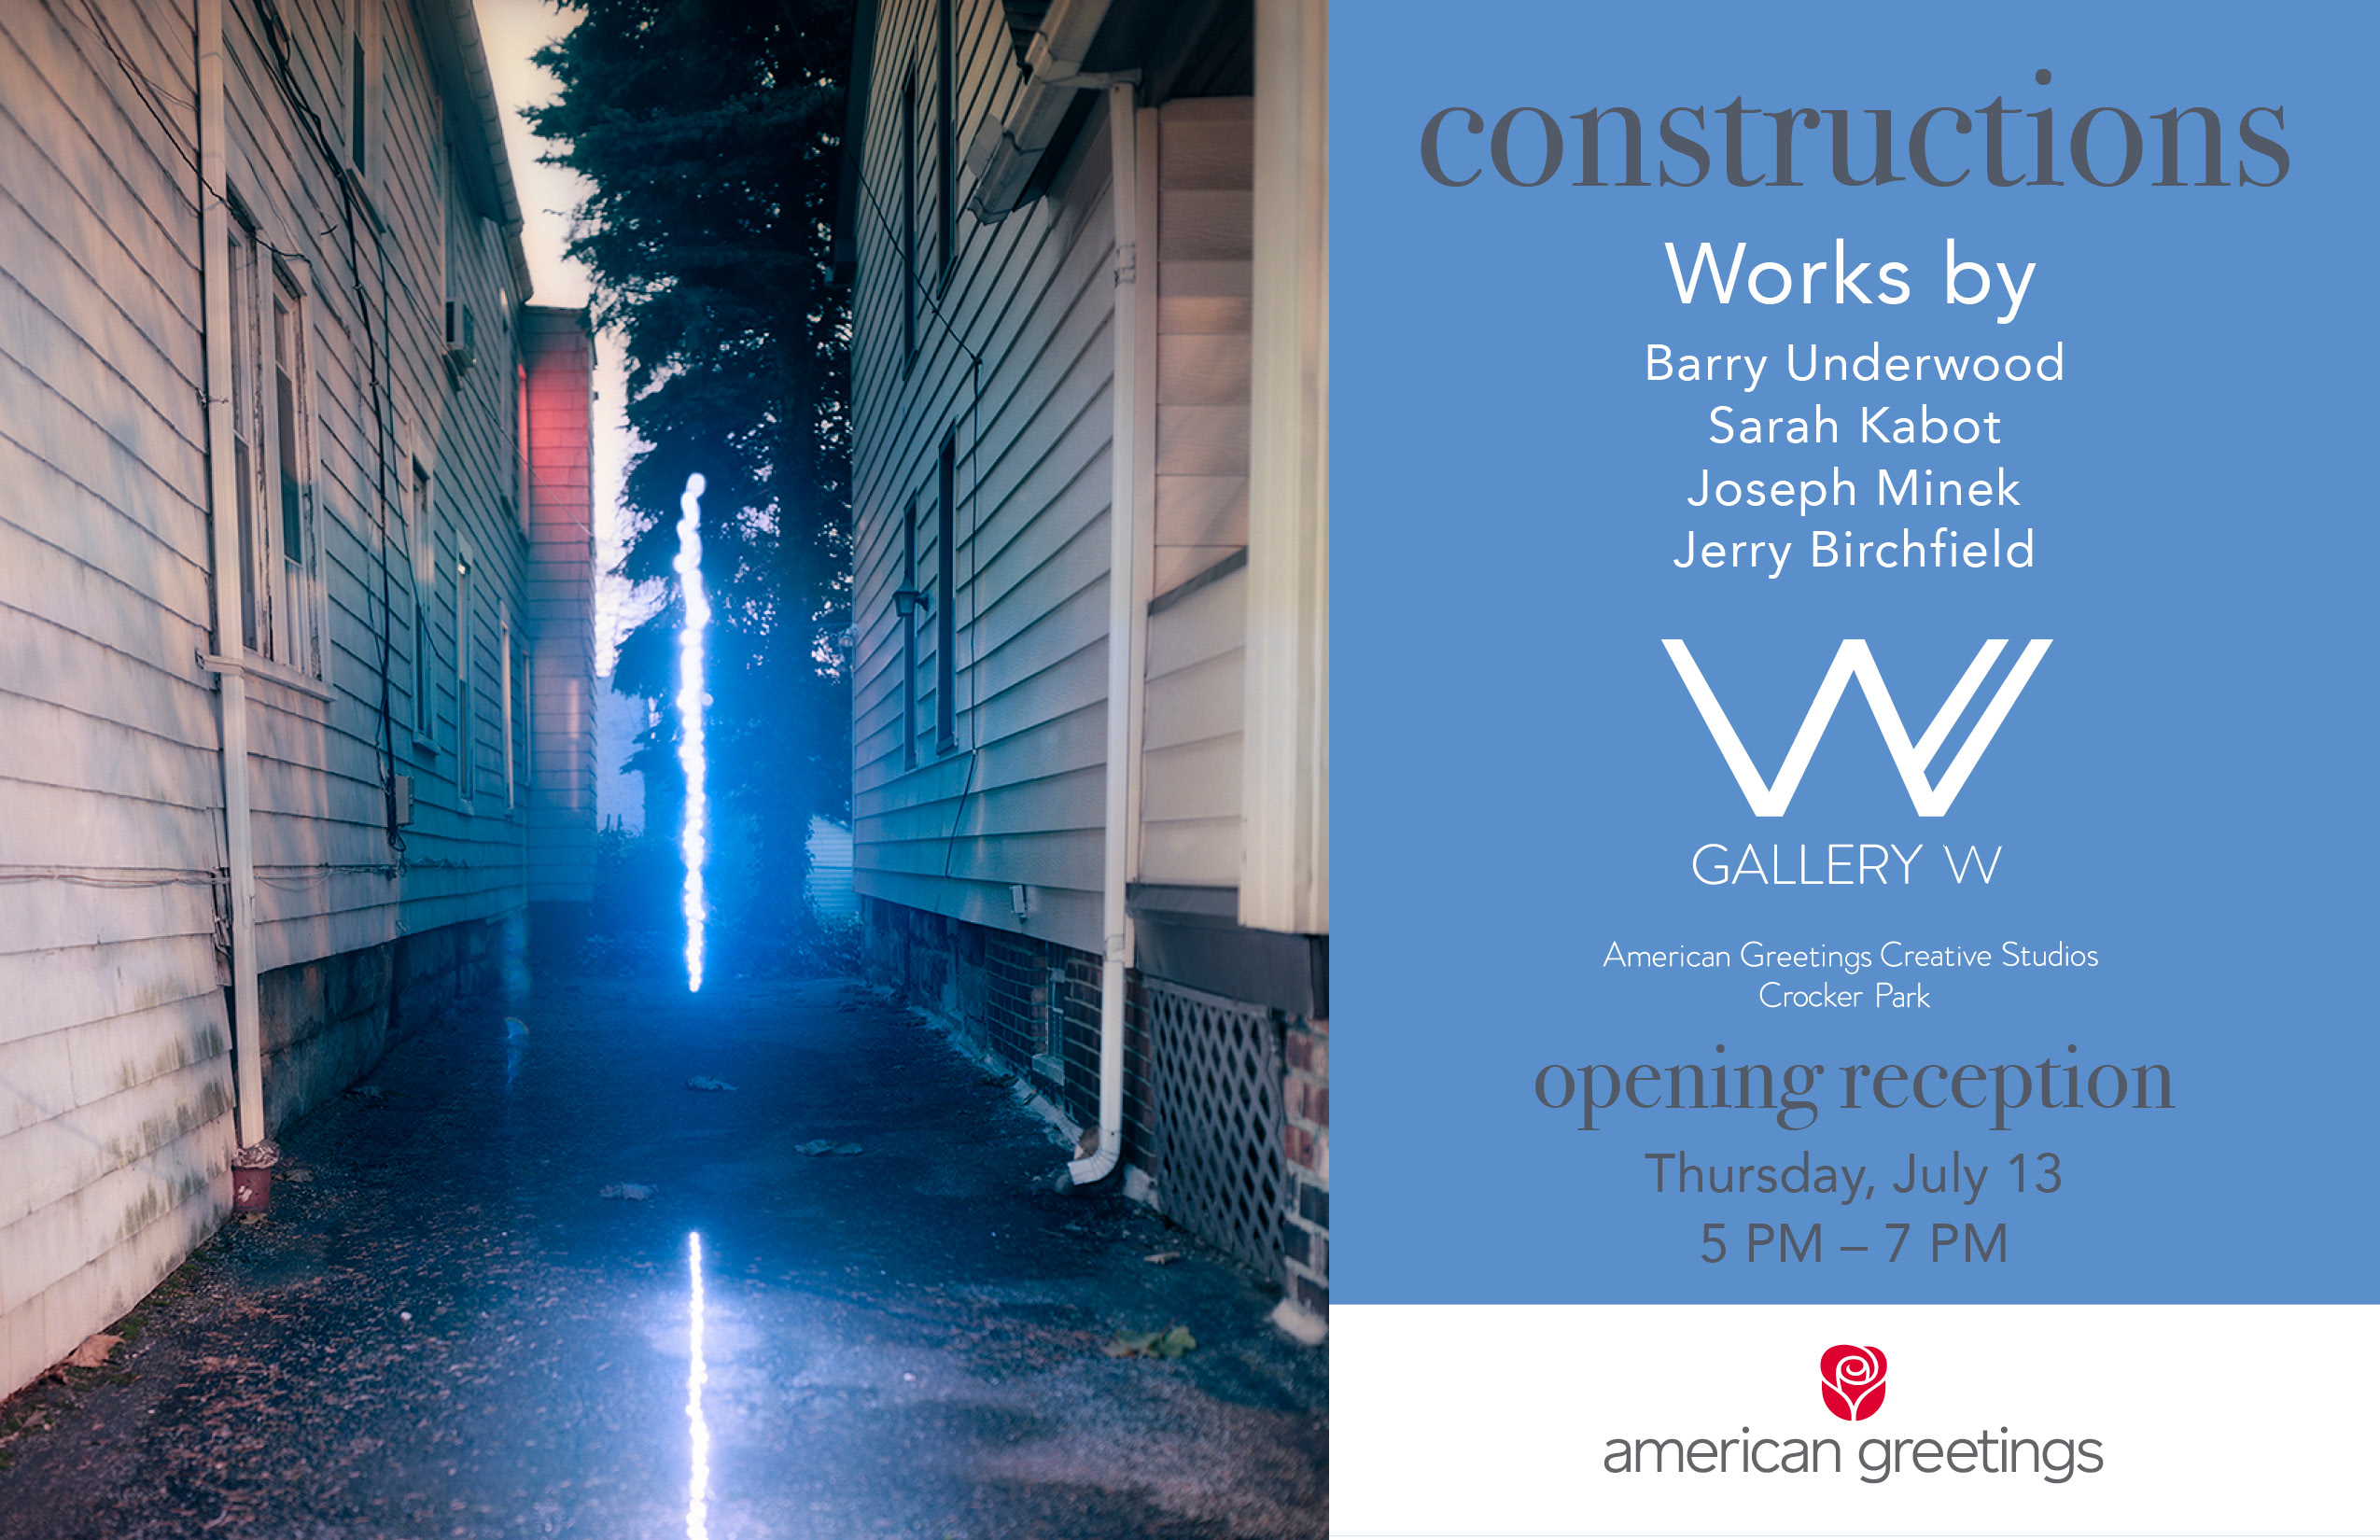 The upcoming exhibit titled "Constructions" at Gallery W, the public art gallery at the new American Greetings world headquarters, features selected works by Barry Underwood, Sarah Kabot, Joseph Minek and Jerry Birchfield 
